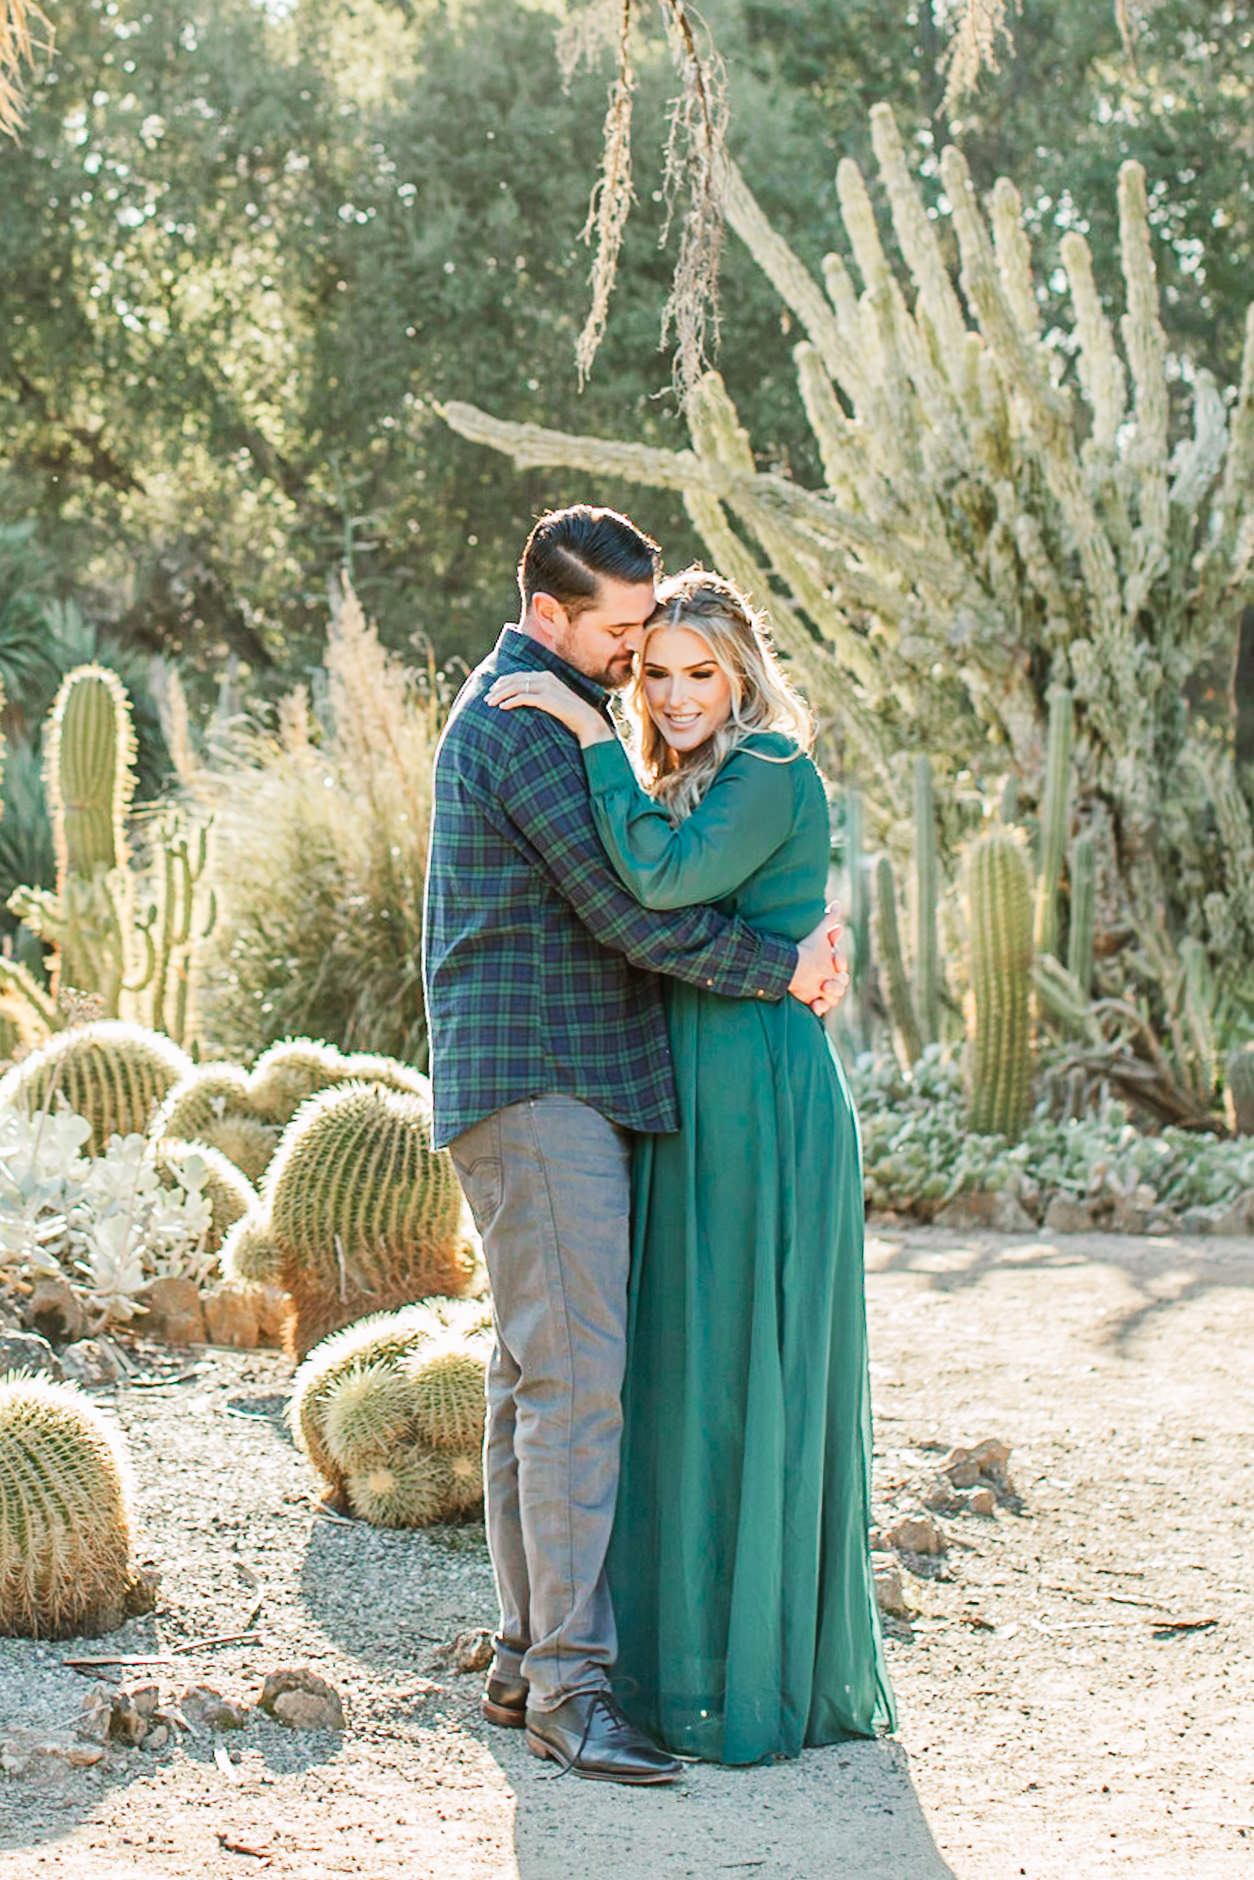 Palo Alto Engagement Session at Arizona Cactus Garden Engaged Couple in front of the cacti